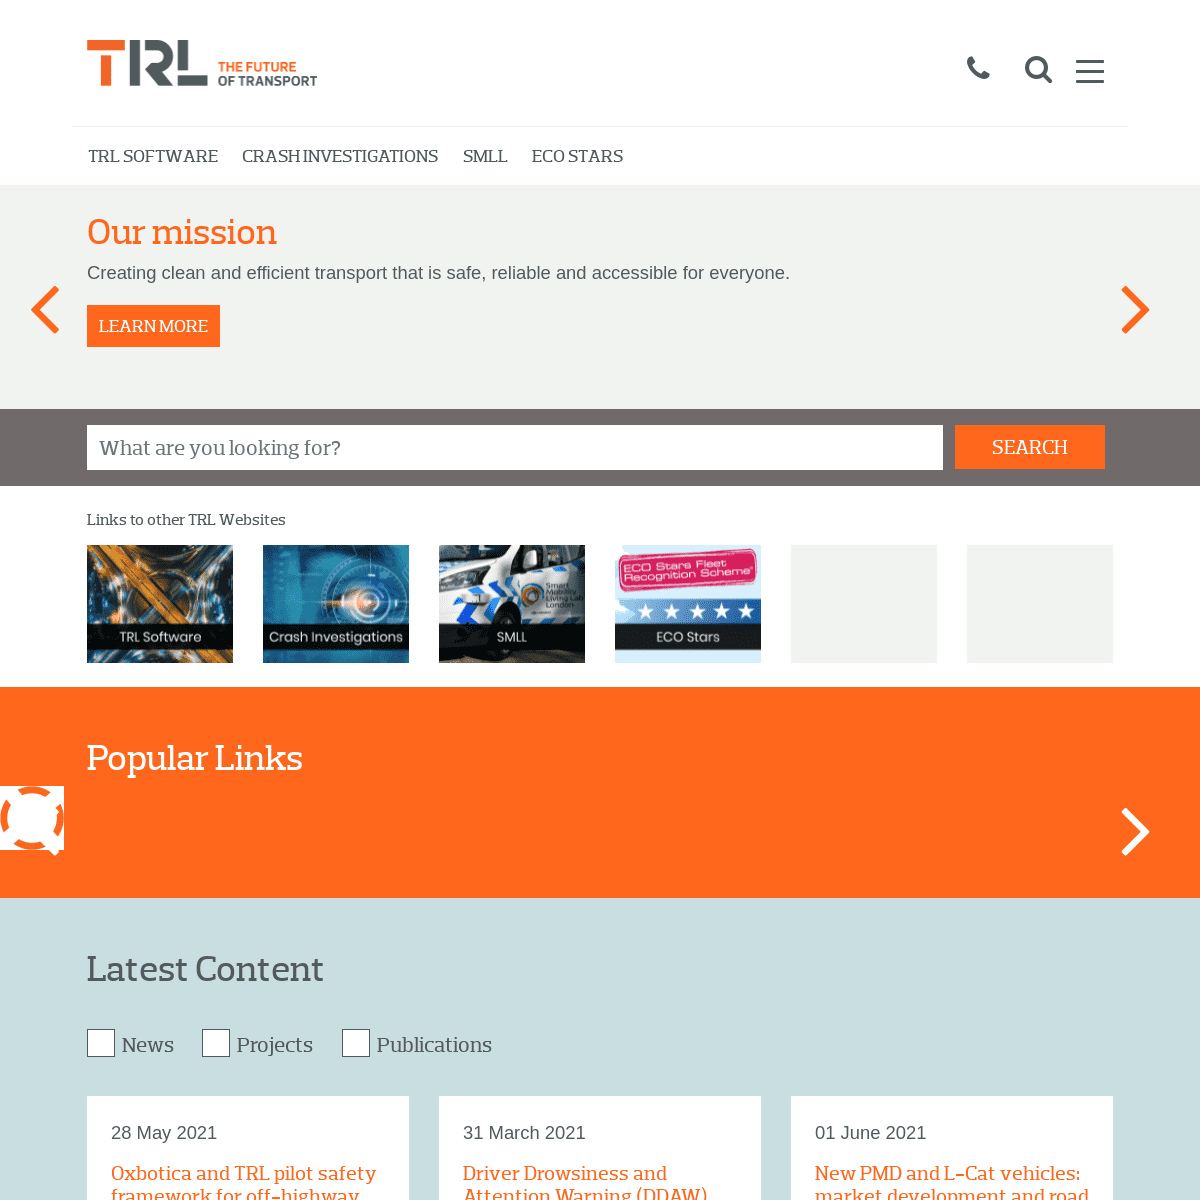 A complete backup of https://trl.co.uk